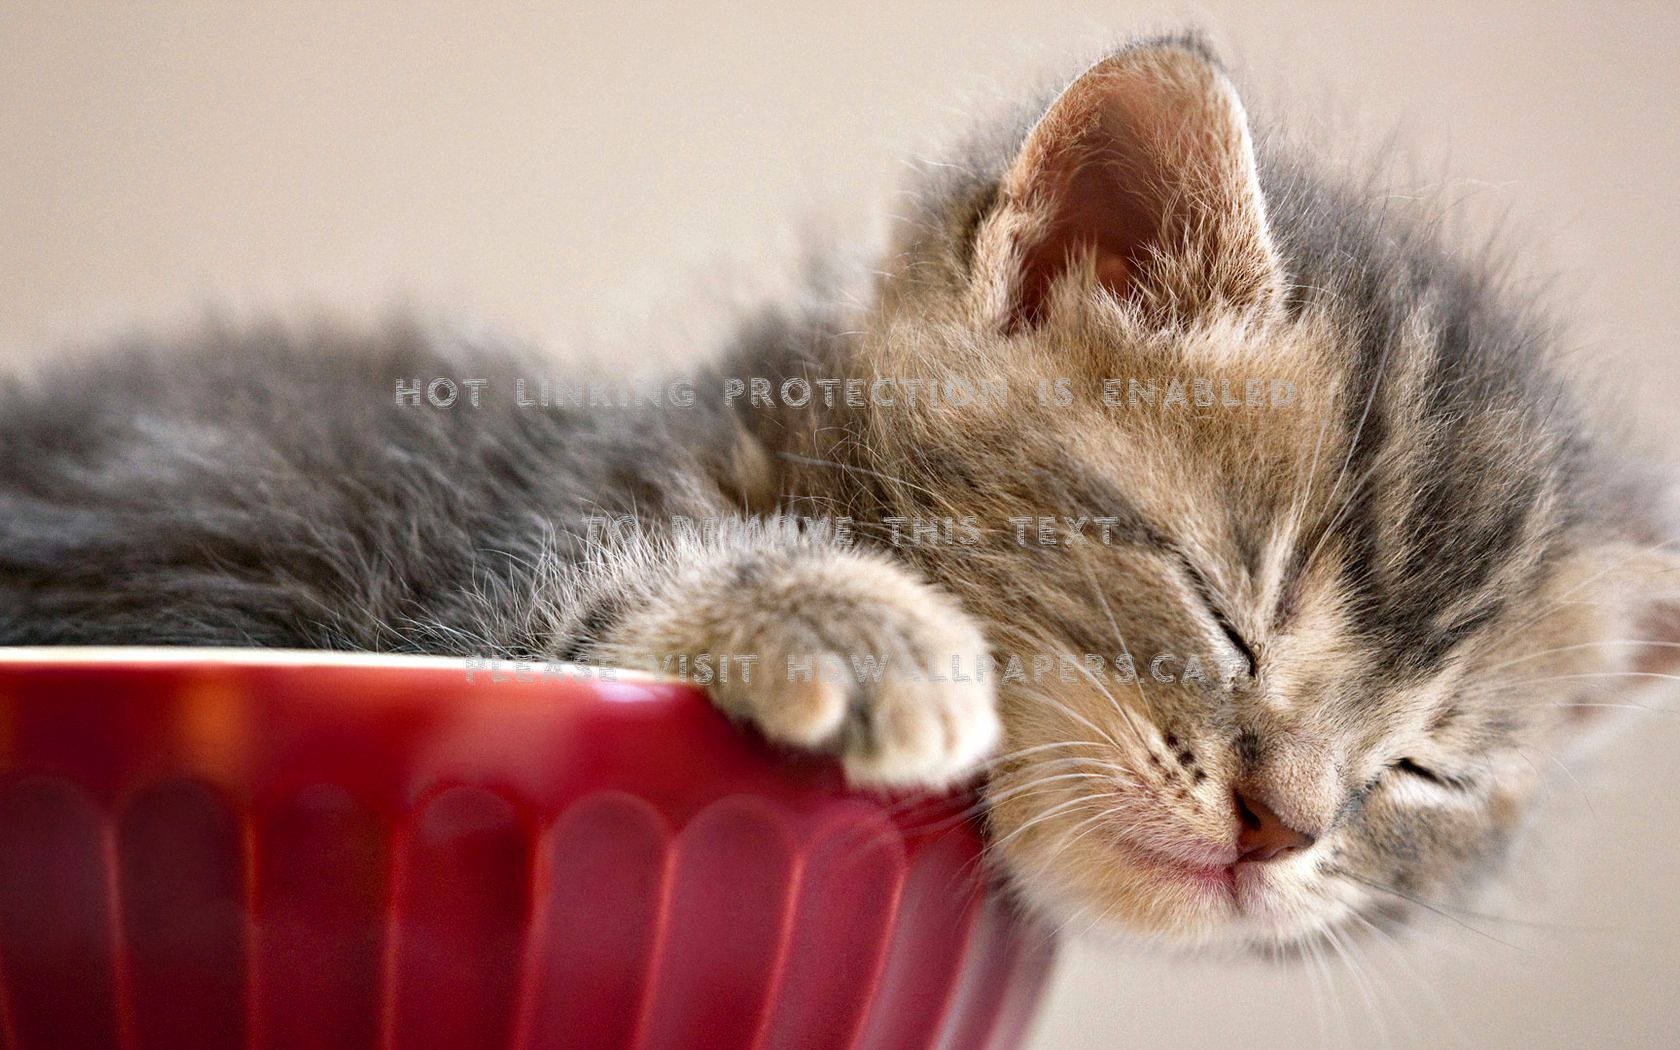 sleepy kitty red paws cats kitten cute cup